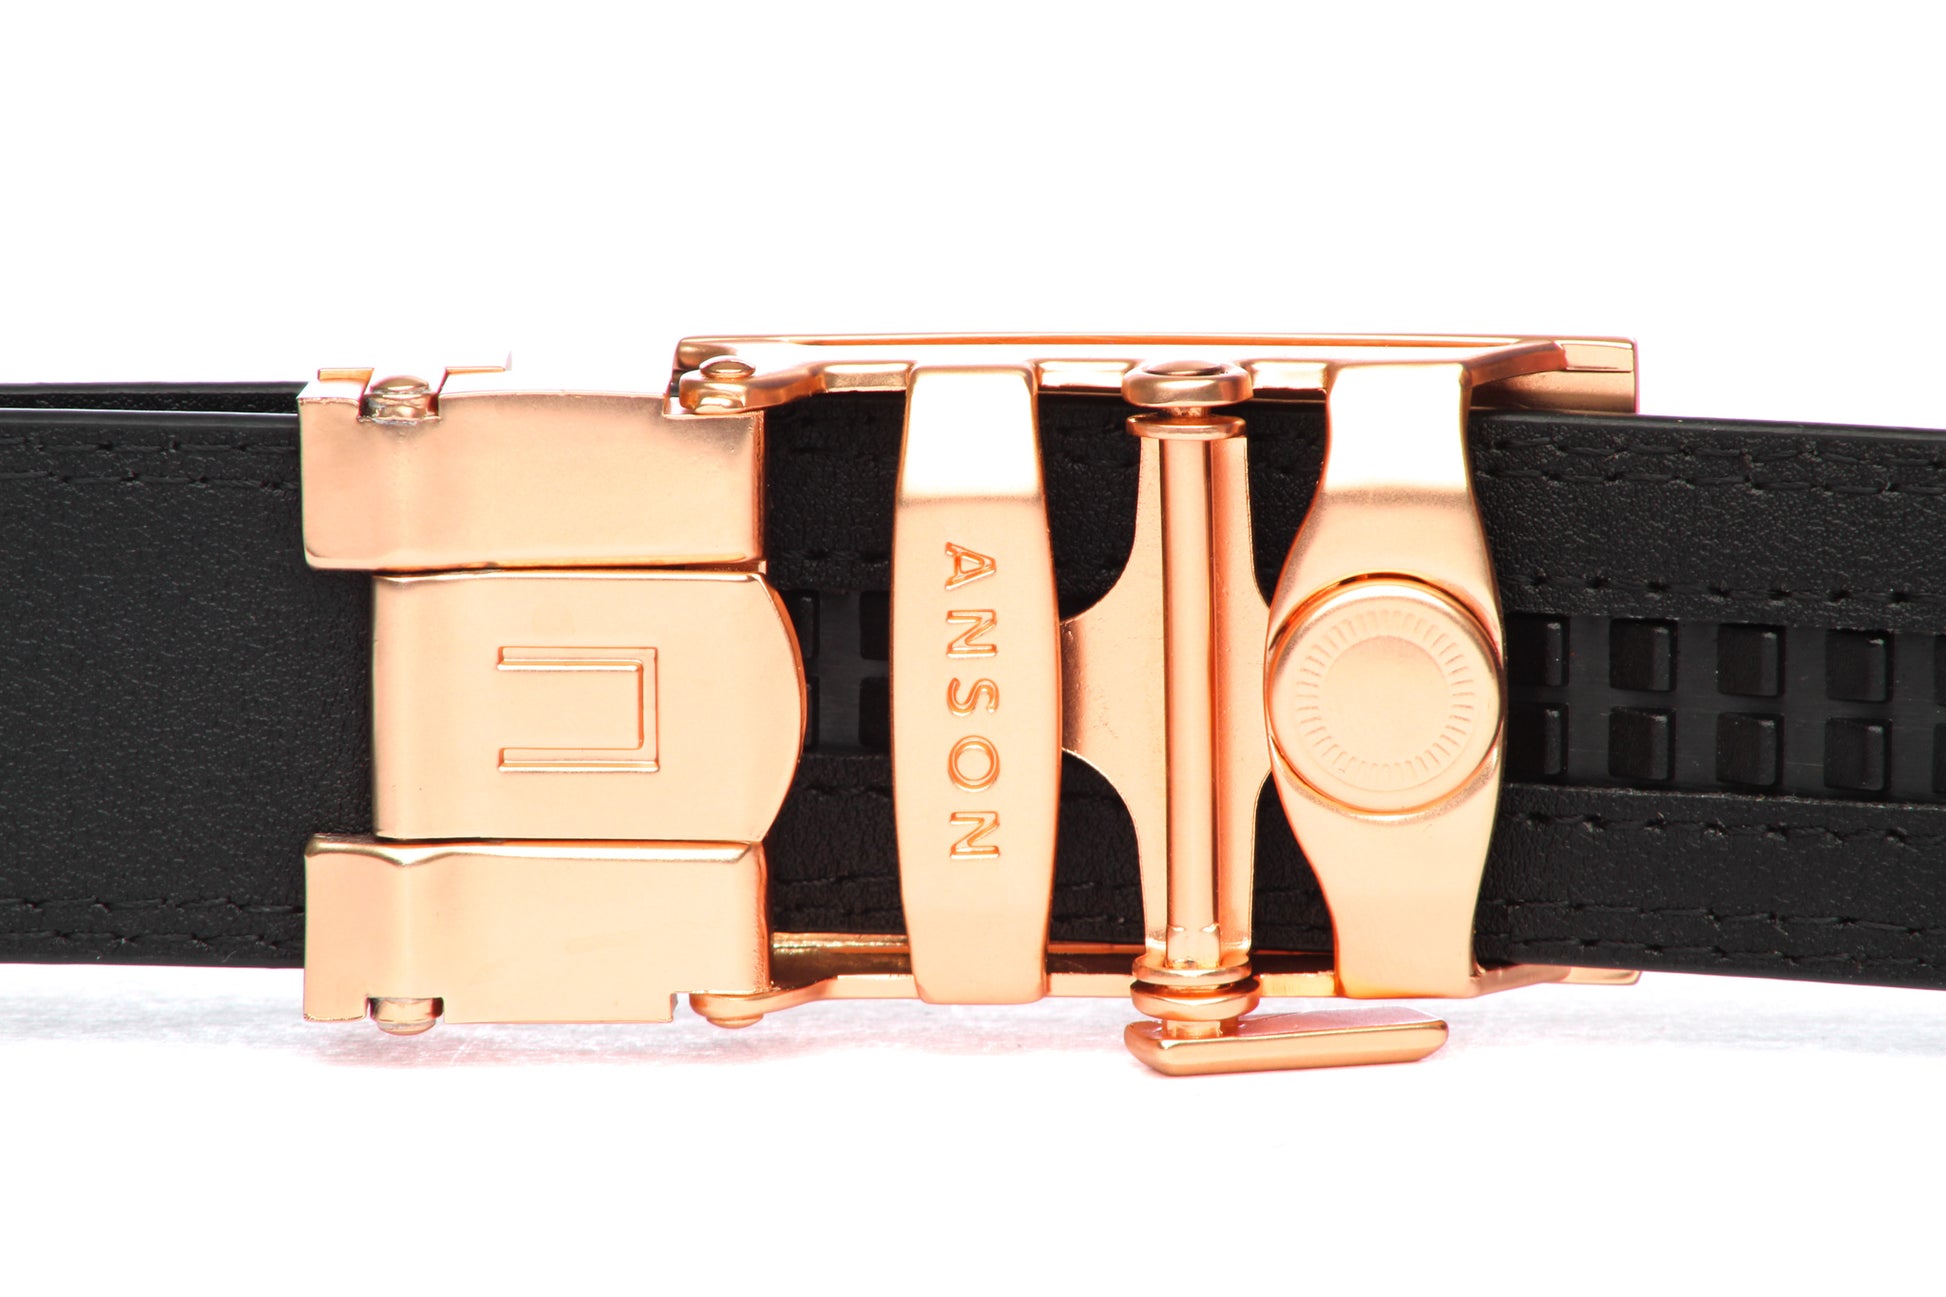 Men's traditional ratchet belt buckle in rose gold with a 1.25-inch width, back view.